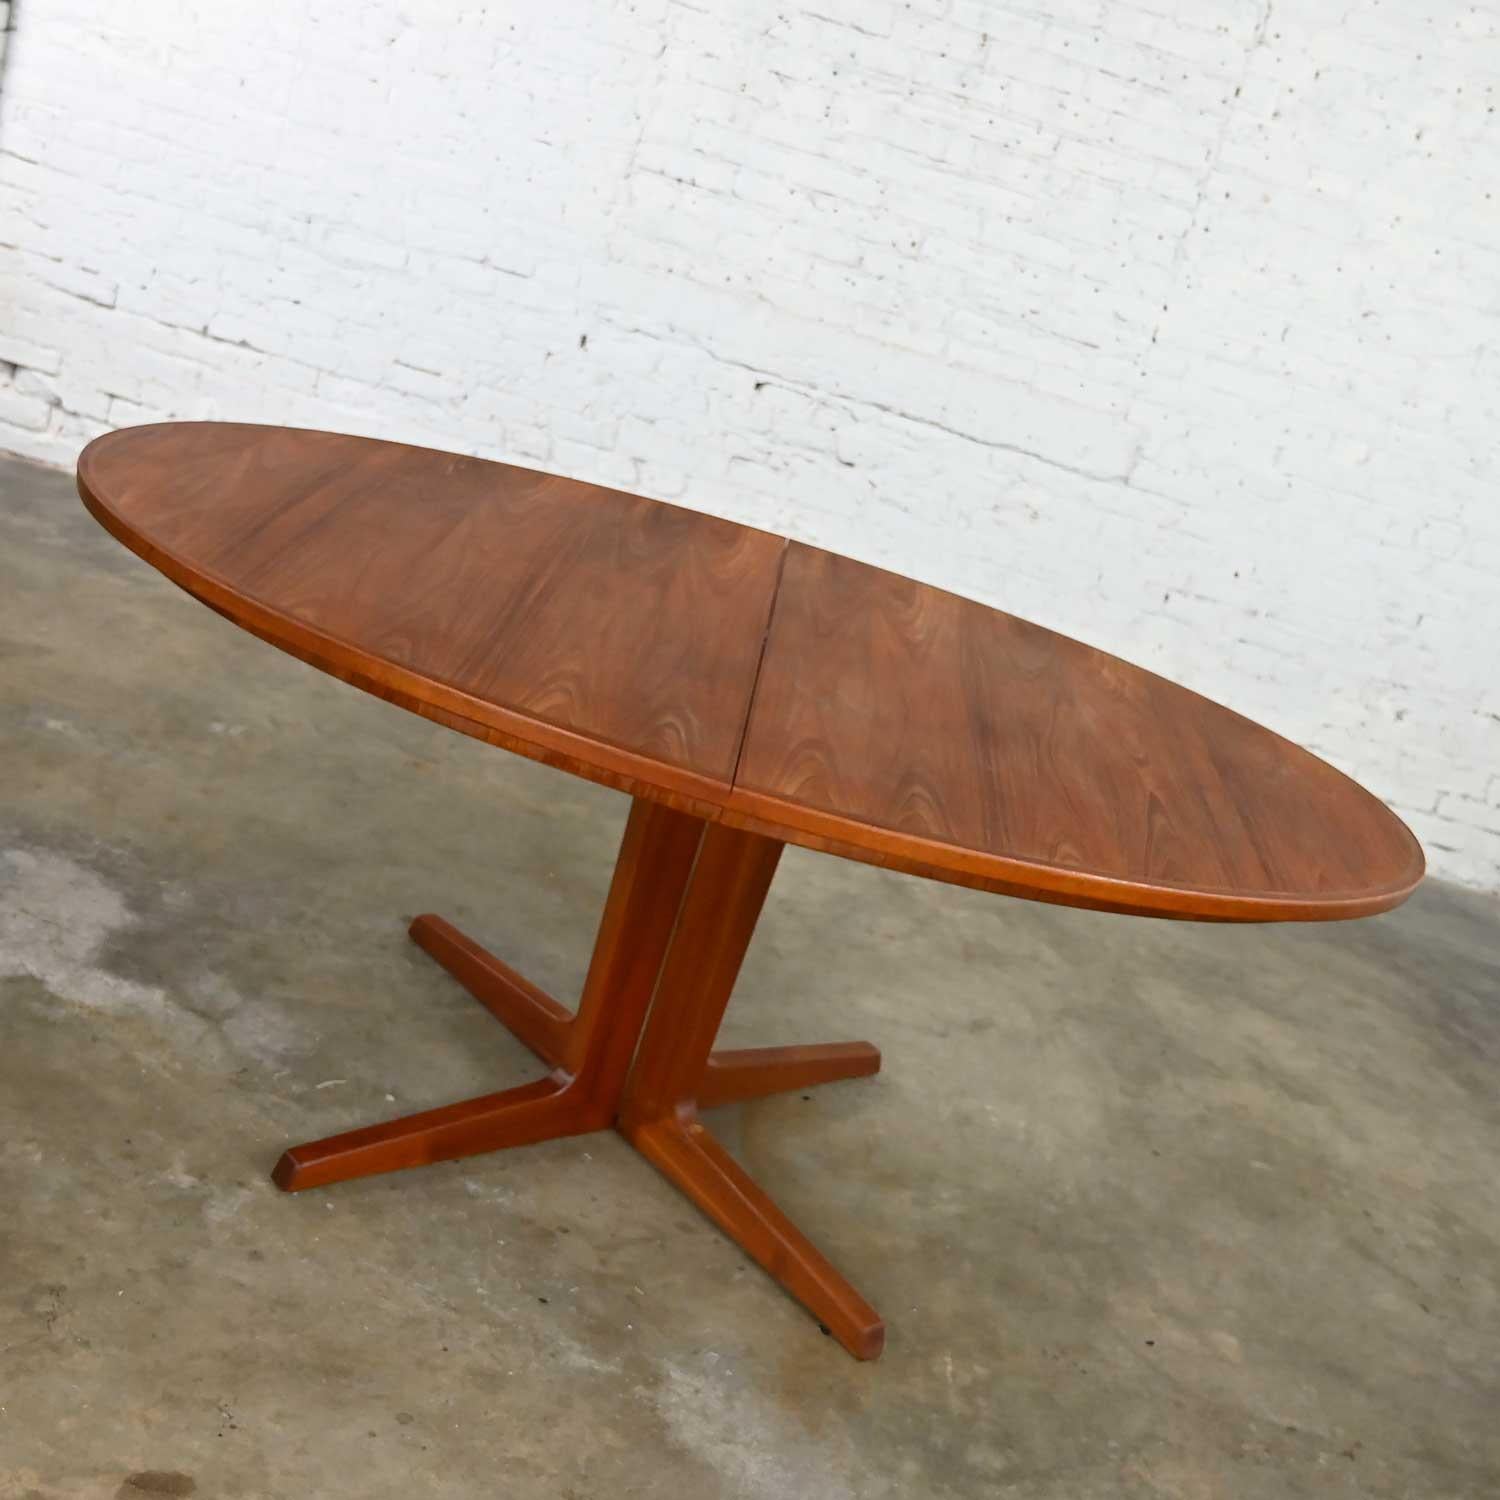 Exquisite vintage Scandinavian Modern teak oval dining table #410 with 2 leaves, oval table pad, and pedestal base attributed to Bernhard Pedersen & Son. Beautiful condition, keeping in mind that this is vintage and not new so will have signs of use